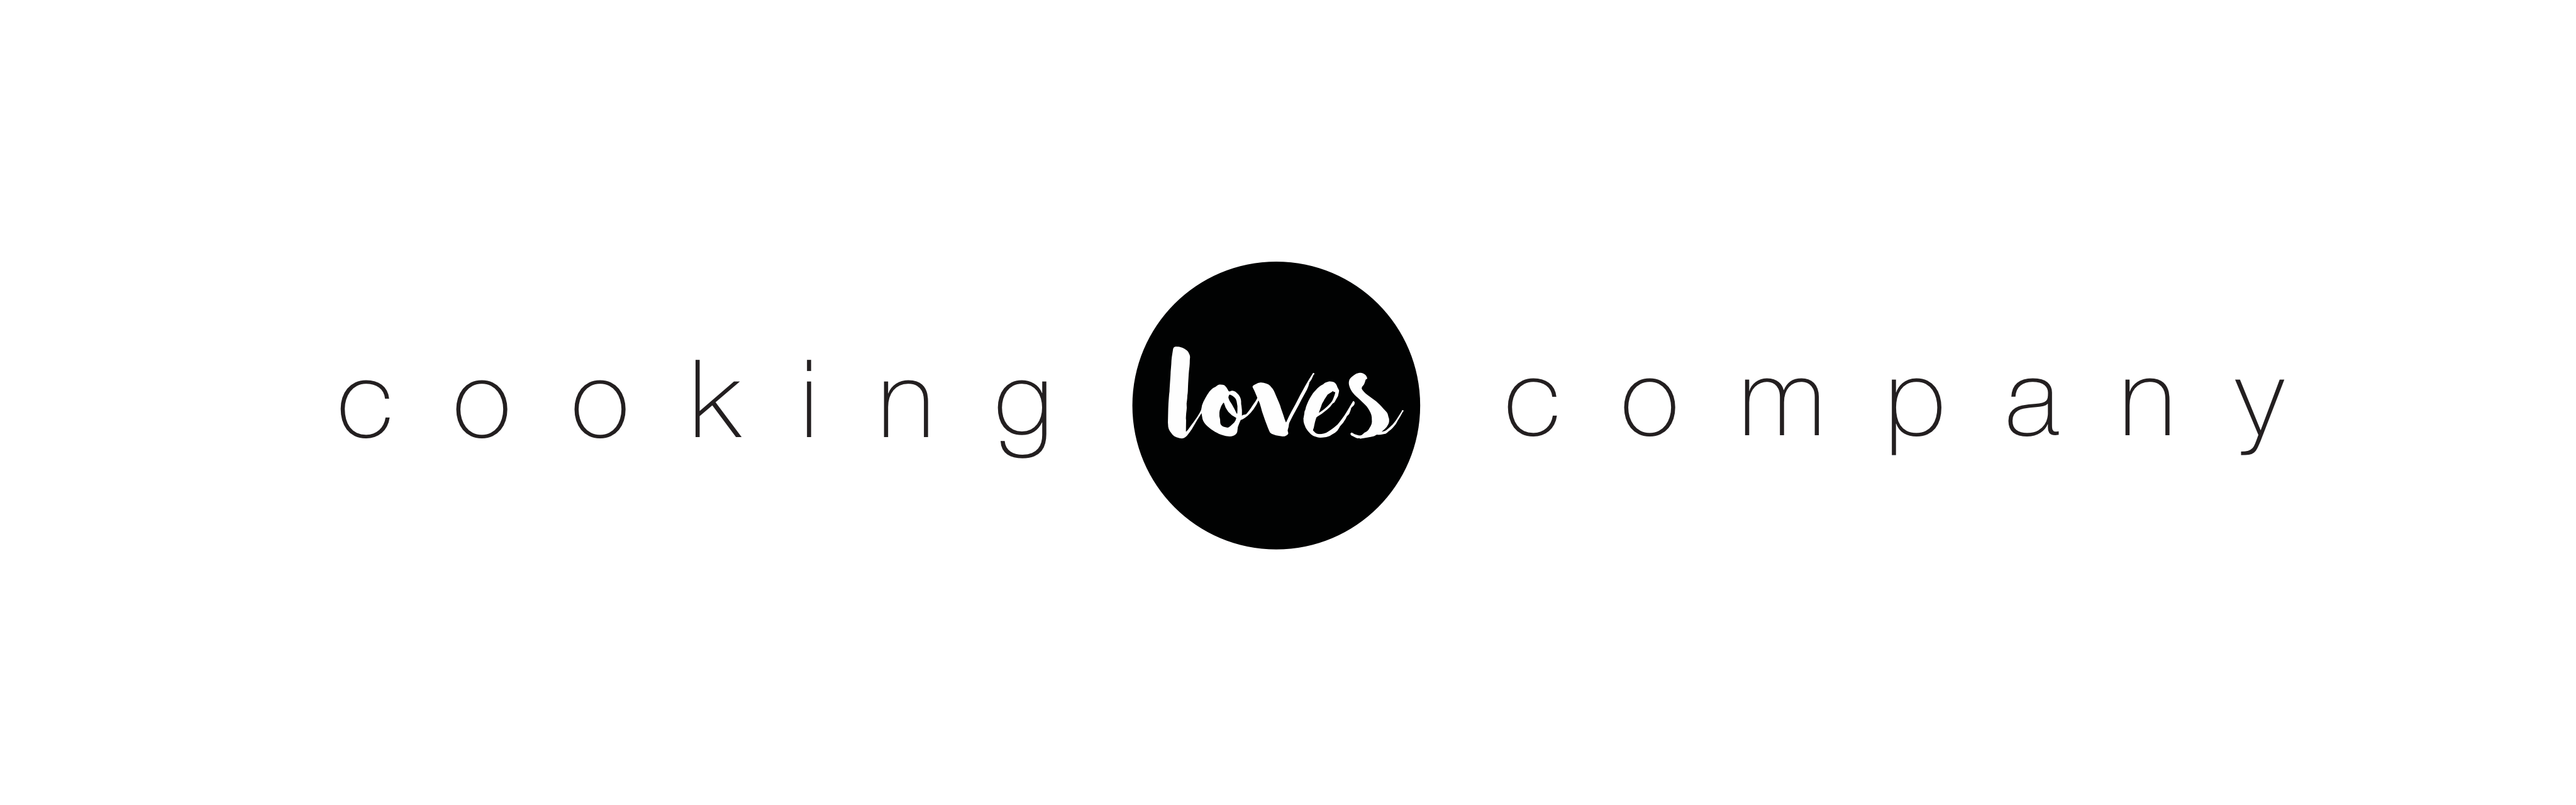 Cooking.com Logo - Dairy Free – Cooking Loves Company